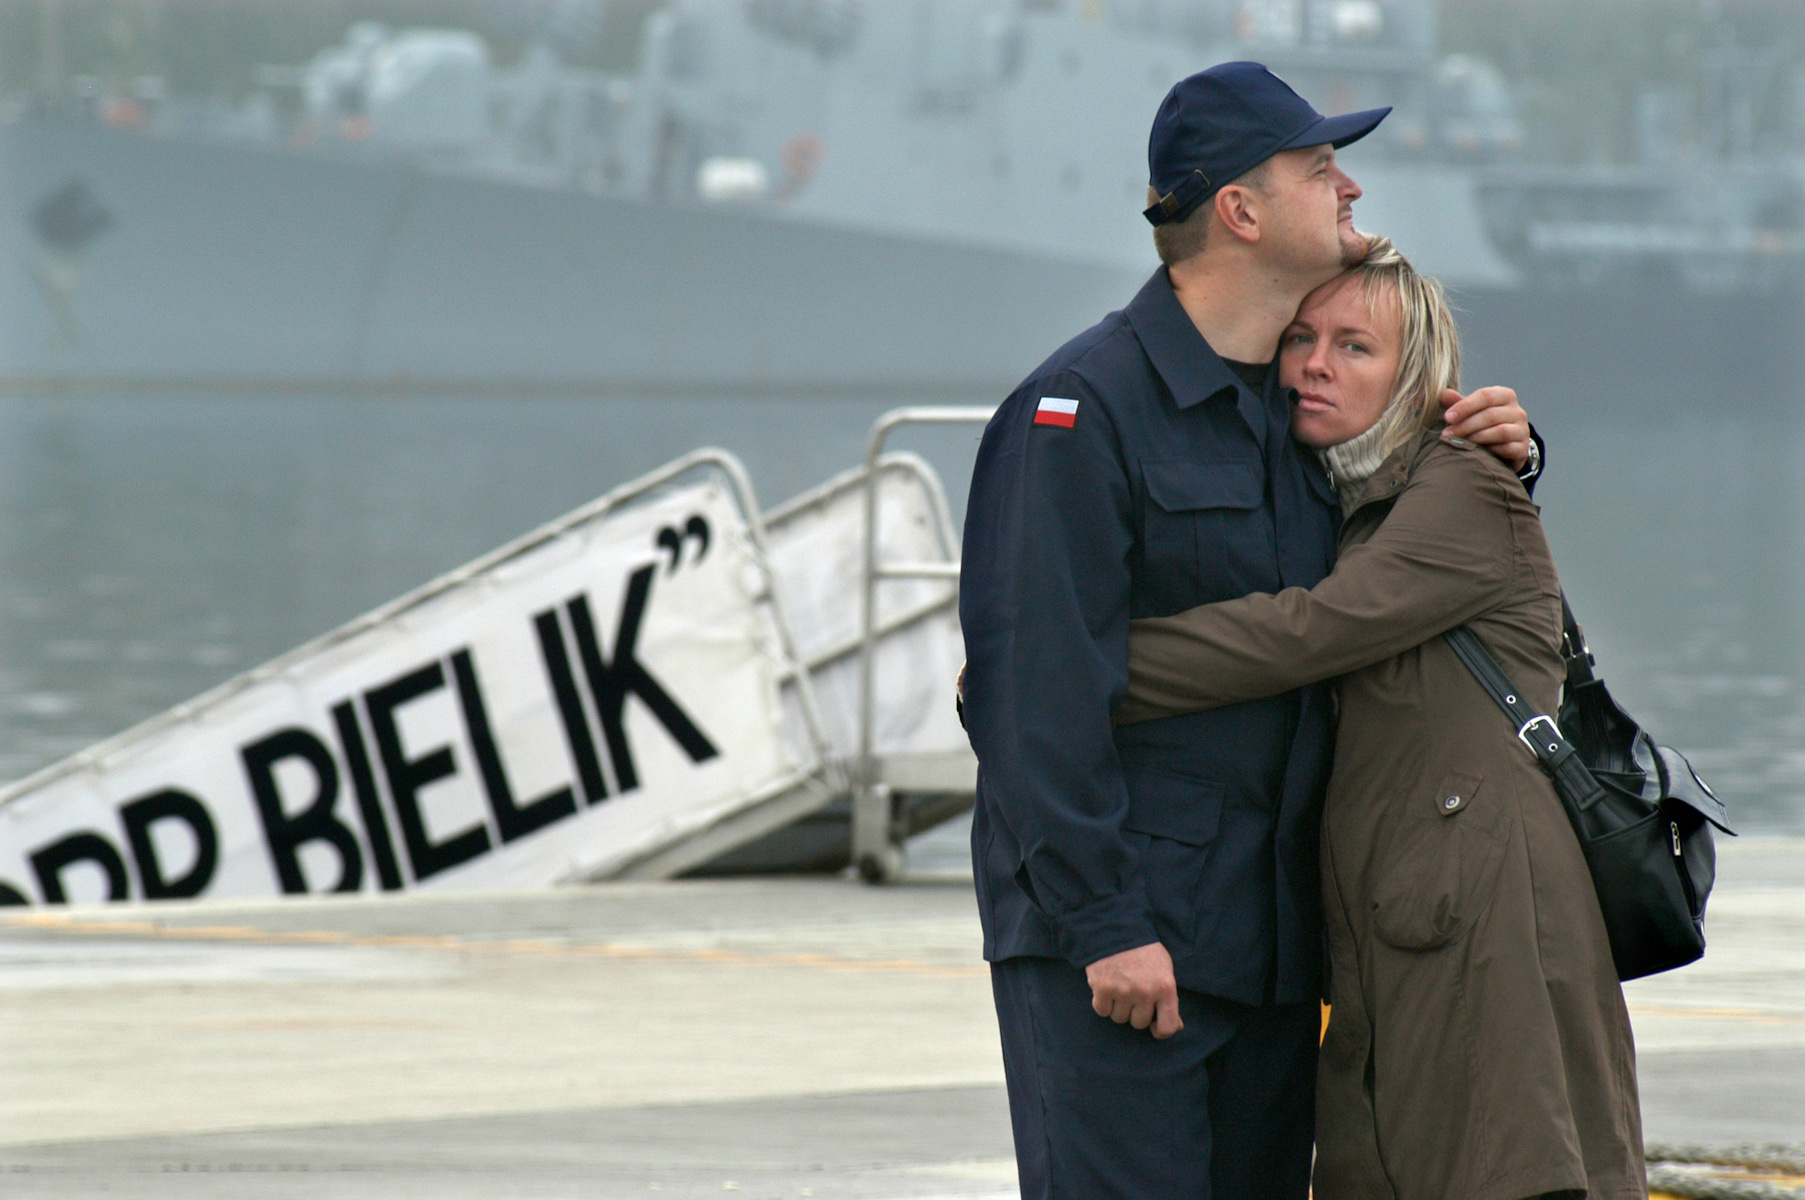 Polish Navy captain Adam Slowik gives farewell to his wife Katarzyna before departure of submarine “Bielik”, which is going to take part in Active Endeavour NATO operation on Mediterranean Sea.